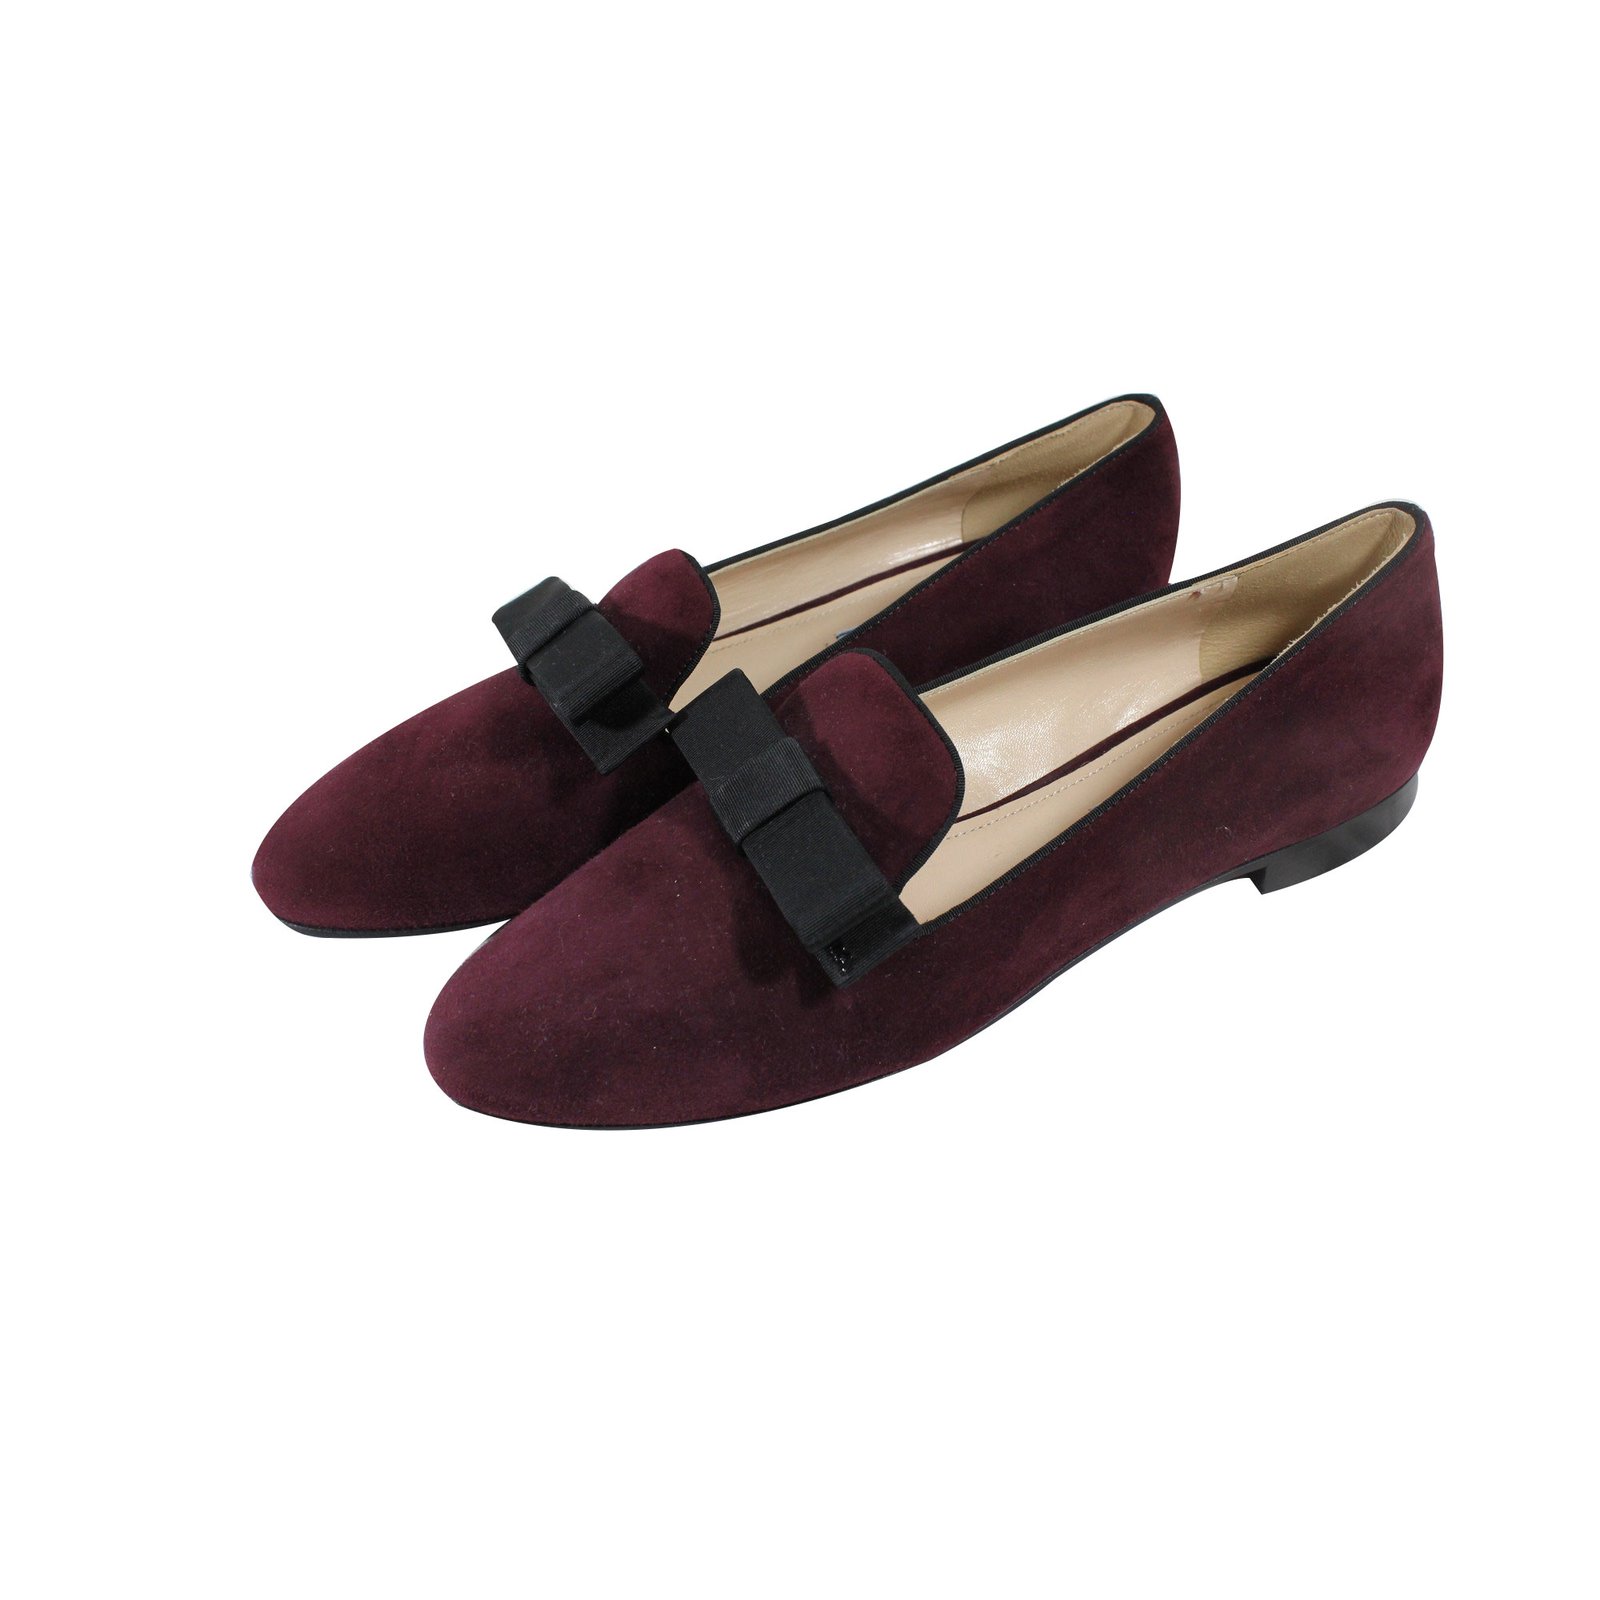 red prada loafers